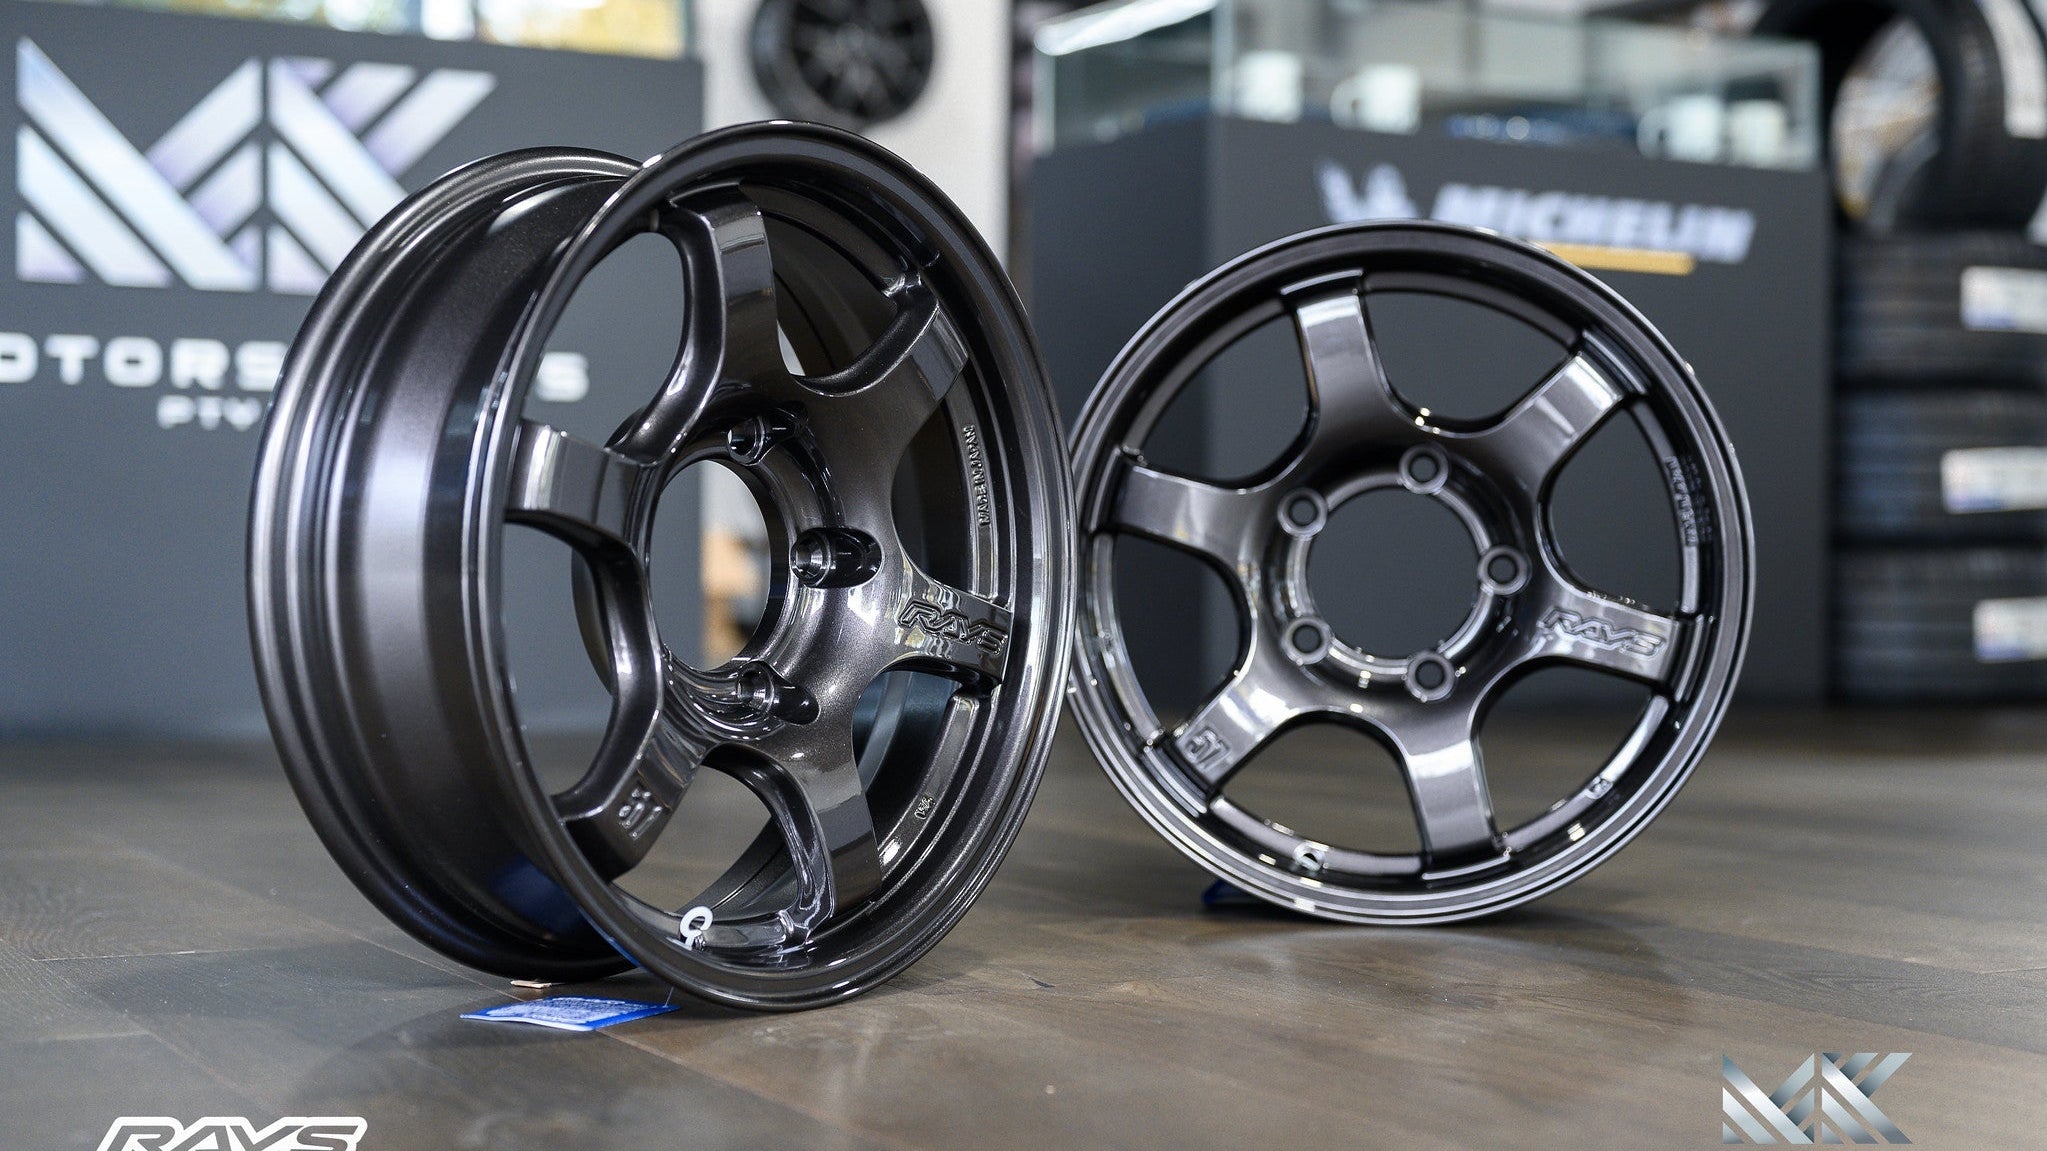 gramLIGHTS 57DR-X - Premium Wheels from Gram Lights - From just $2190.00! Shop now at MK MOTORSPORTS